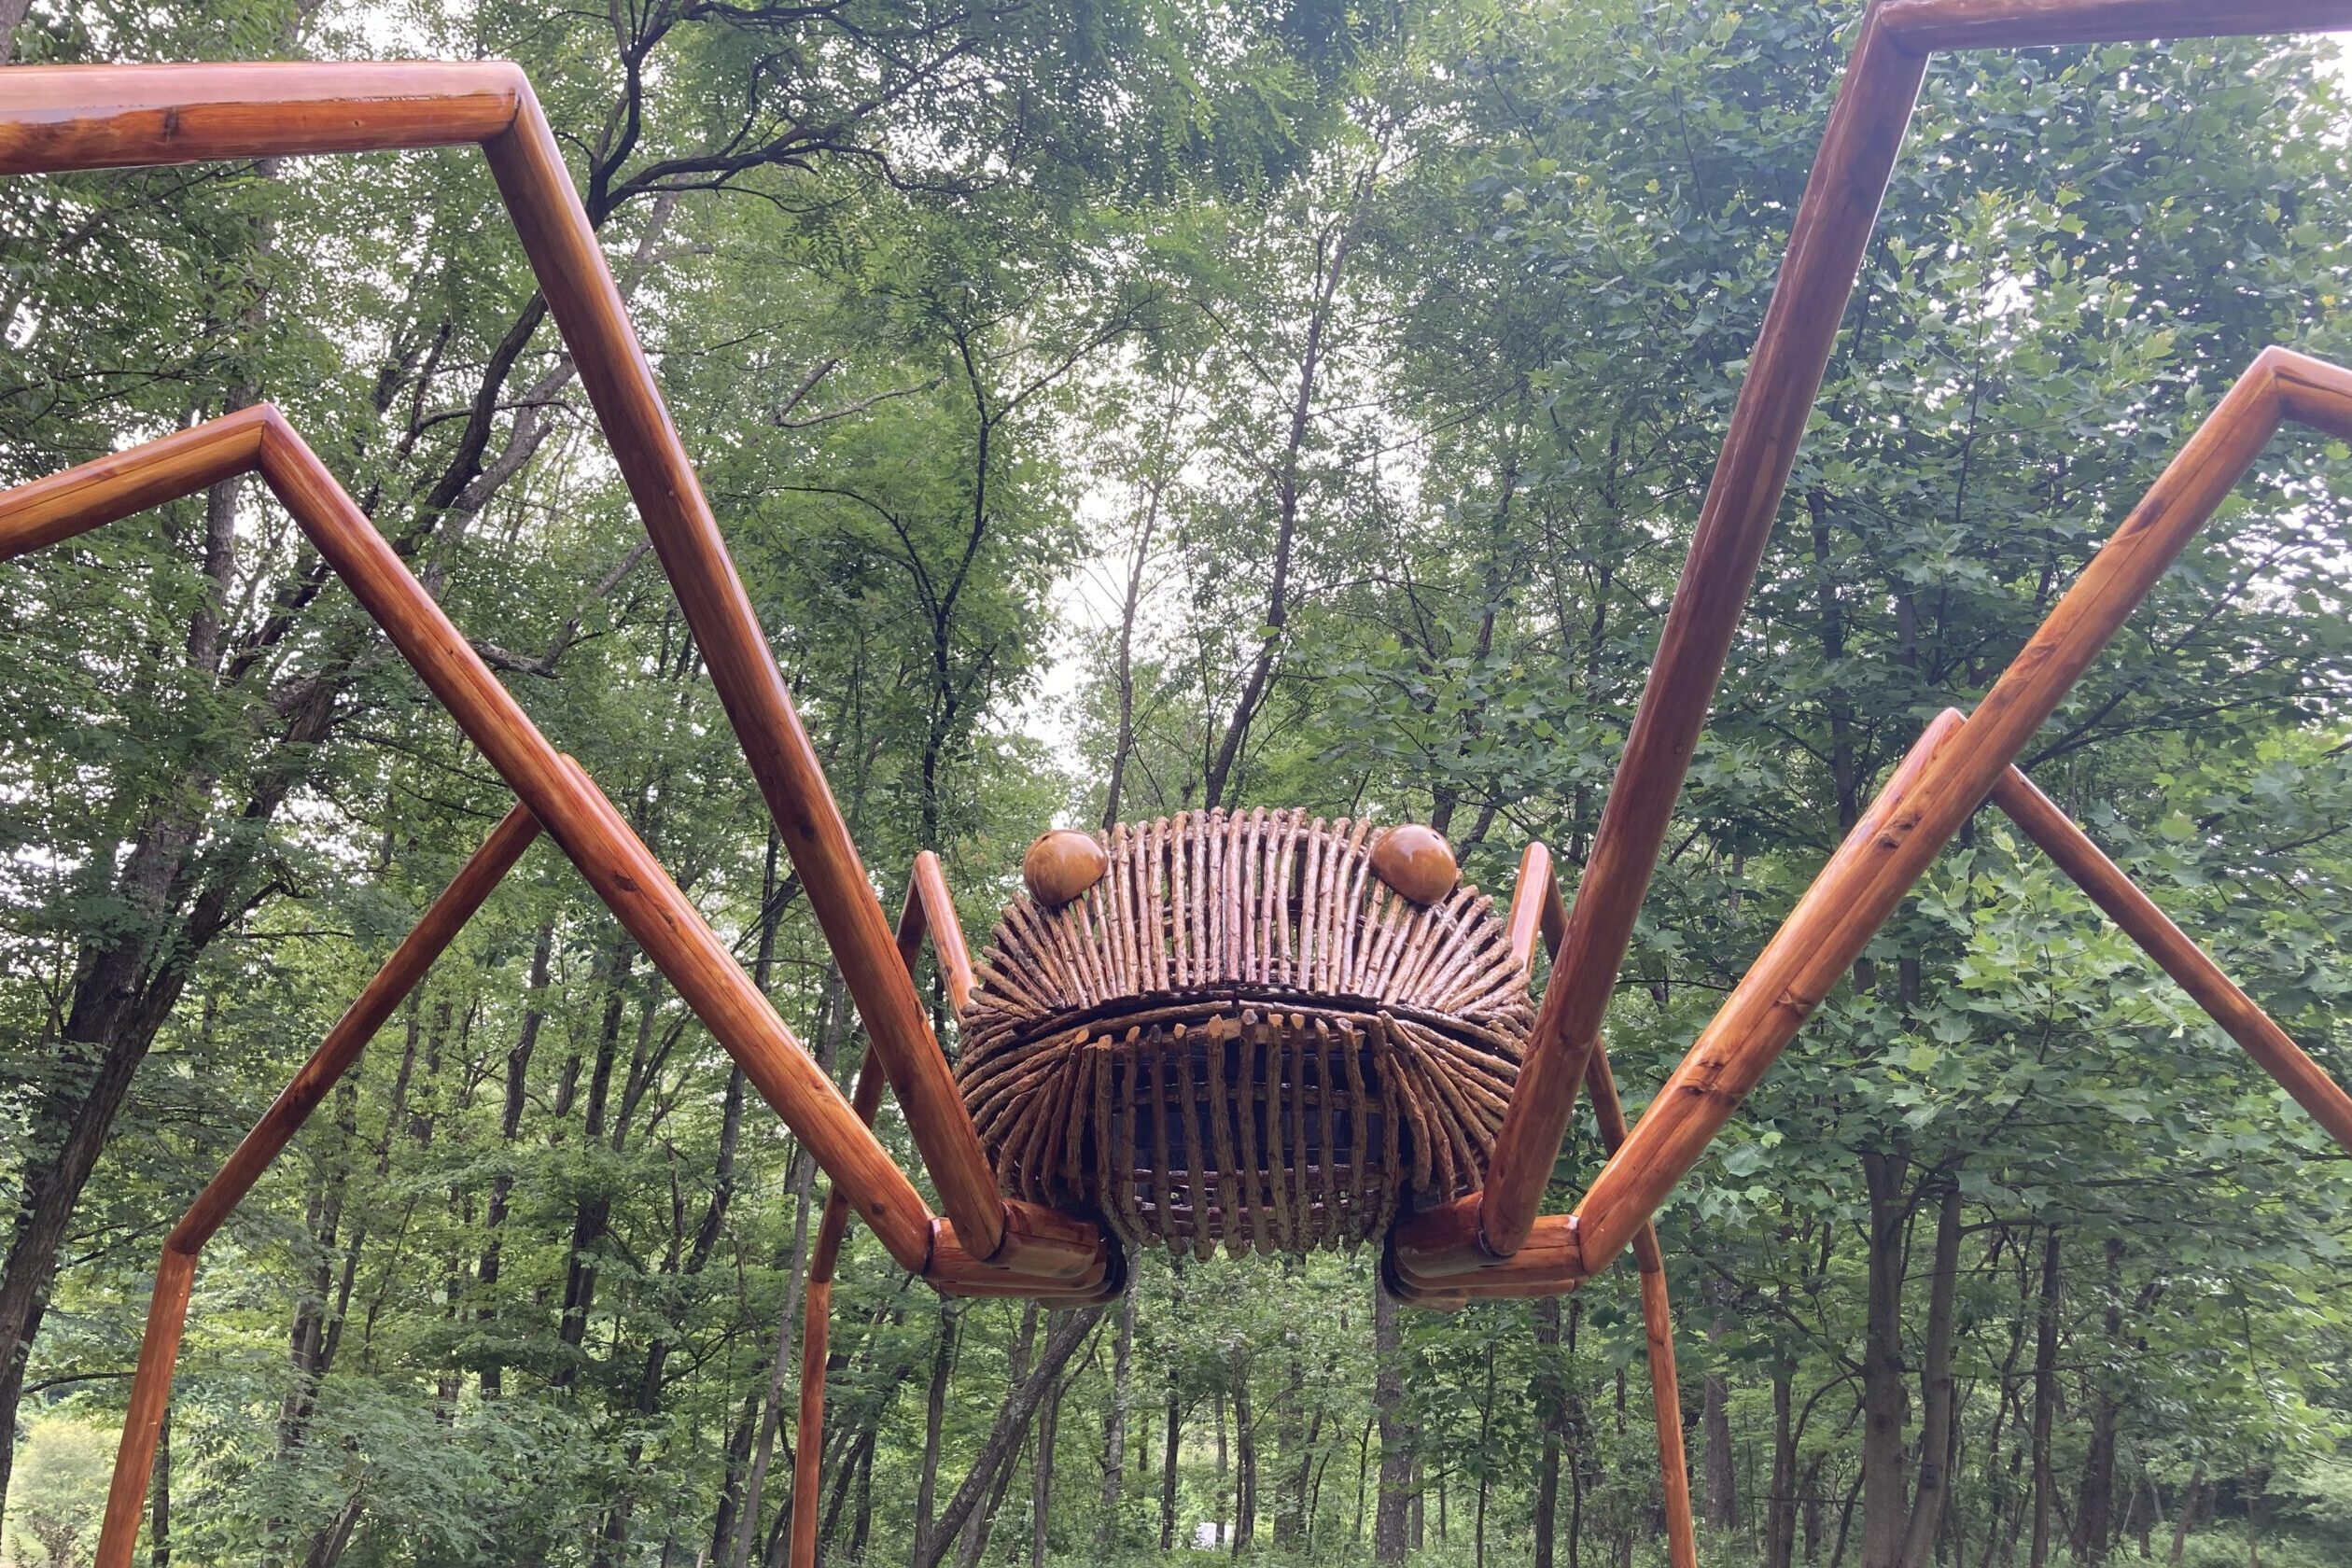 a giant daddy long legs sculpture made of wood set against green trees